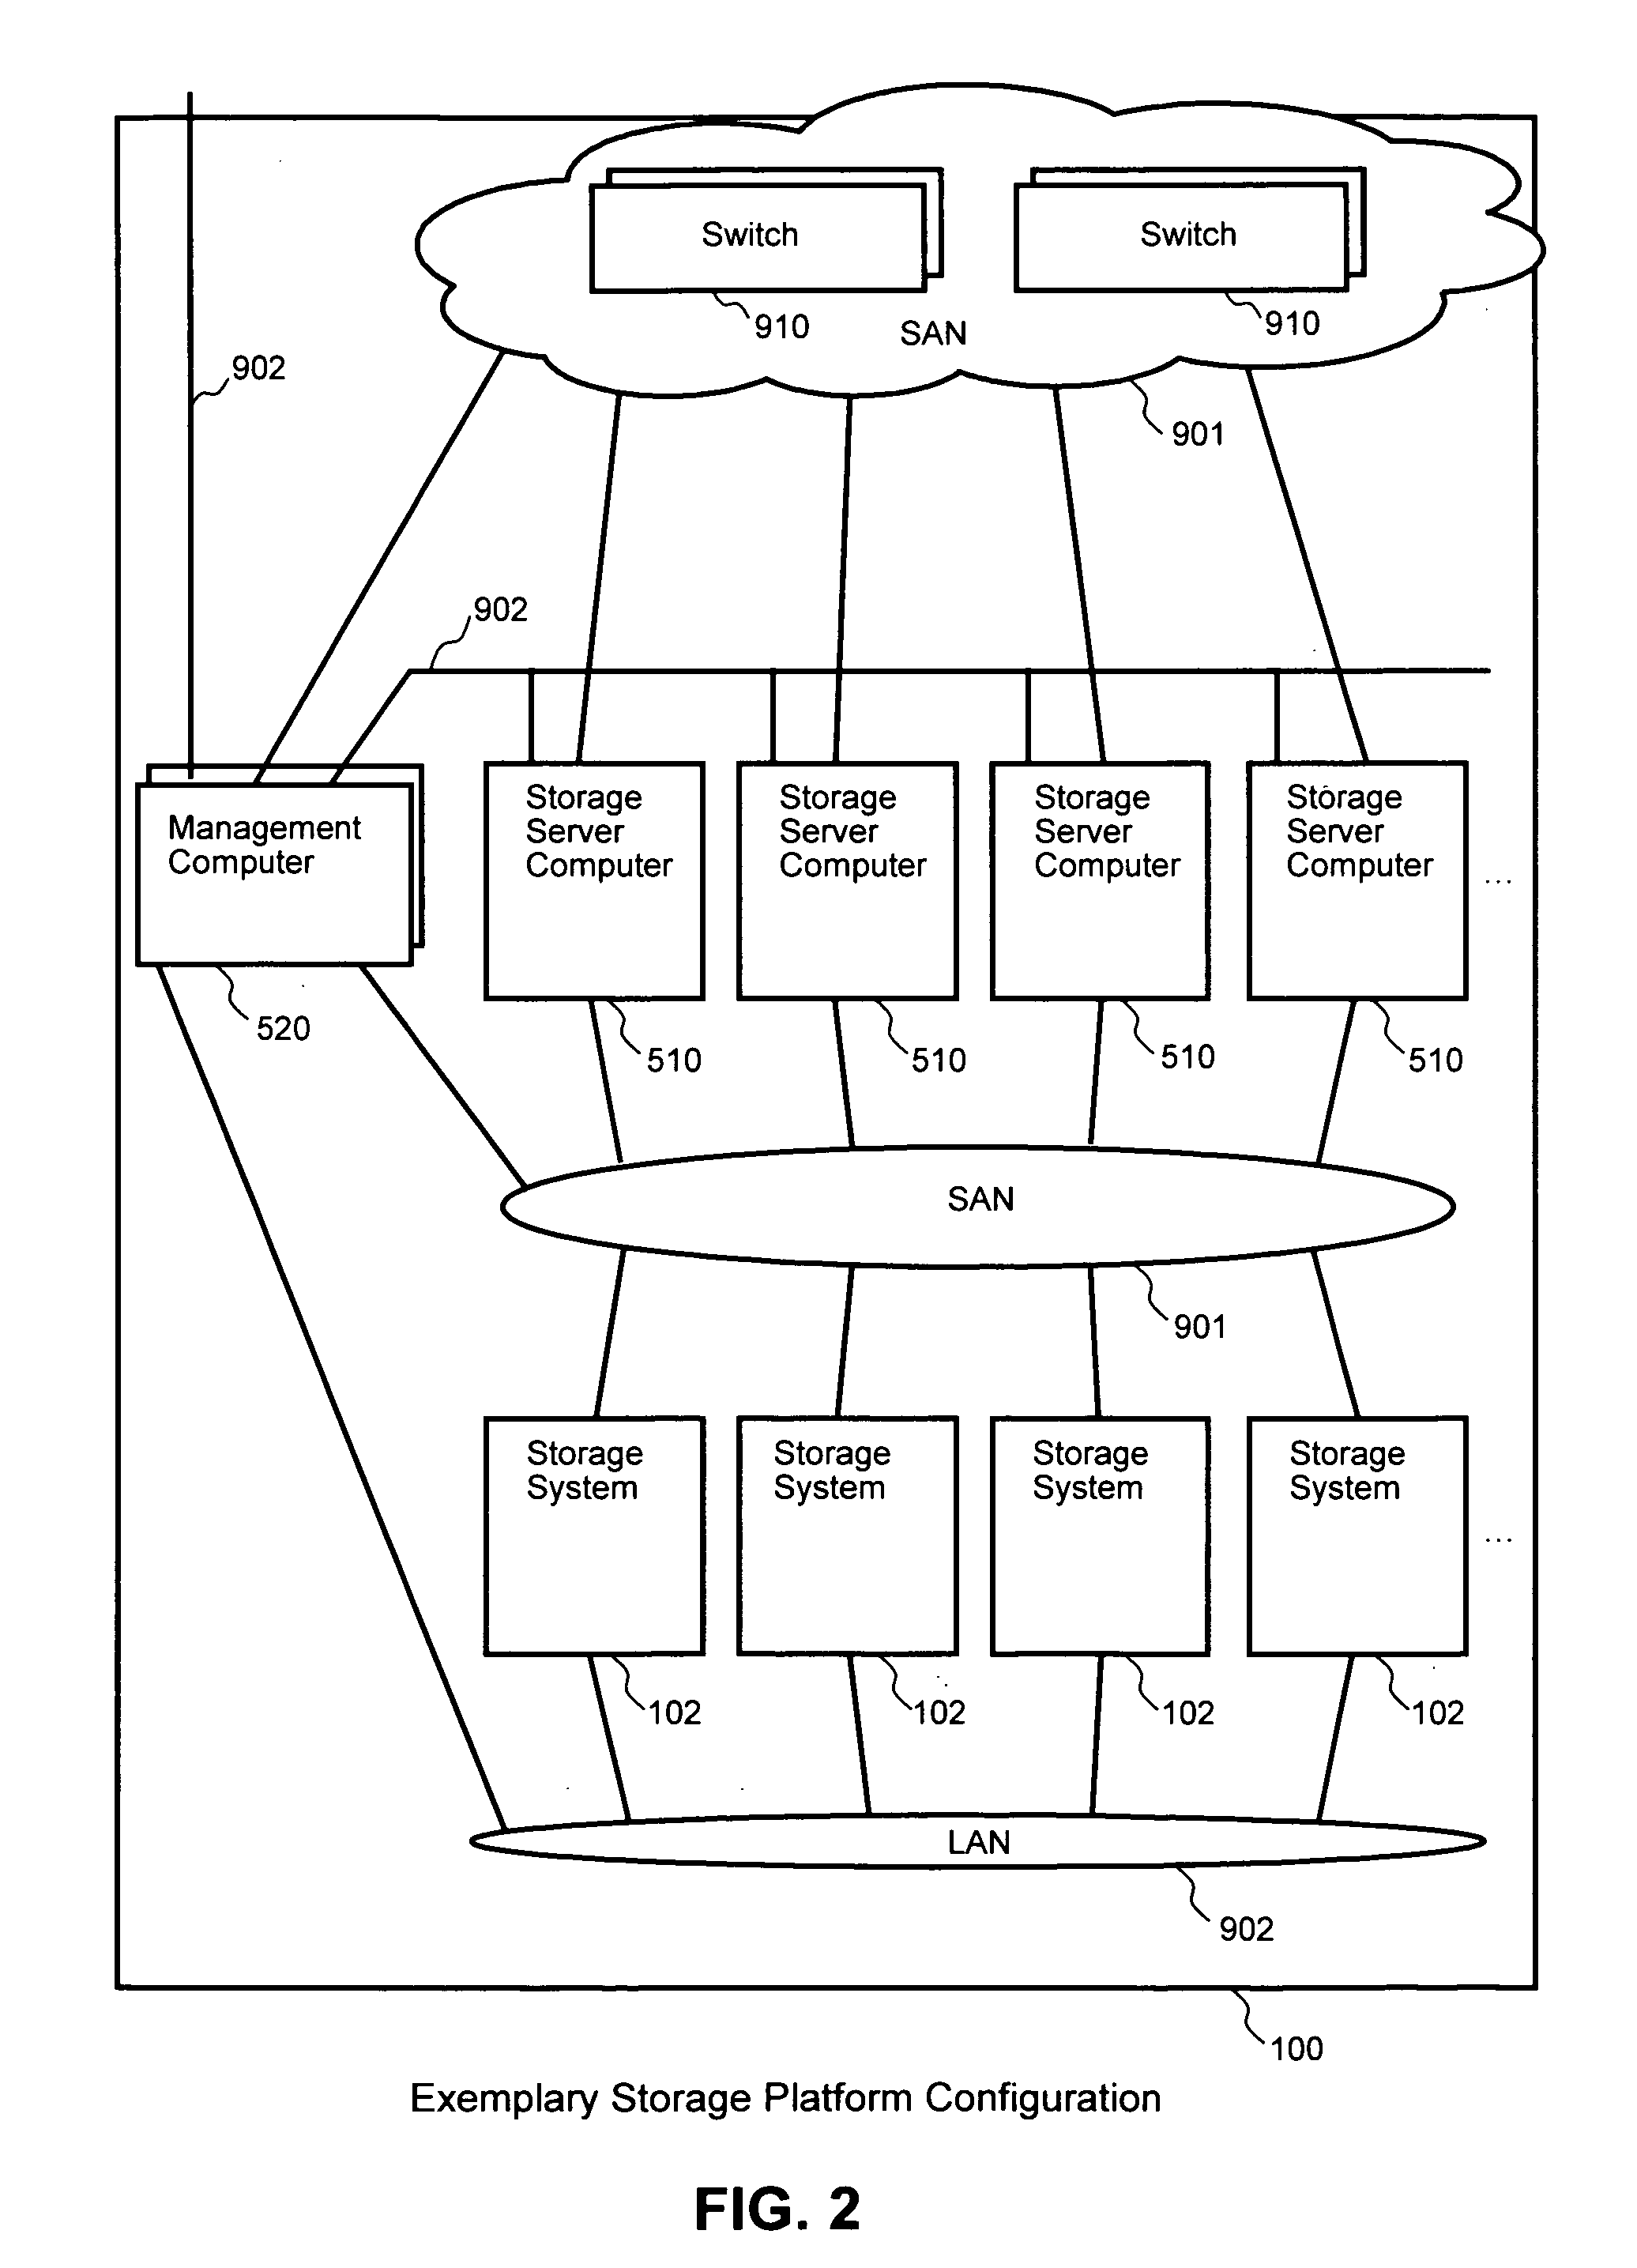 Methods, systems and programs for partitioned storage resources and services in dynamically reorganized storage platforms